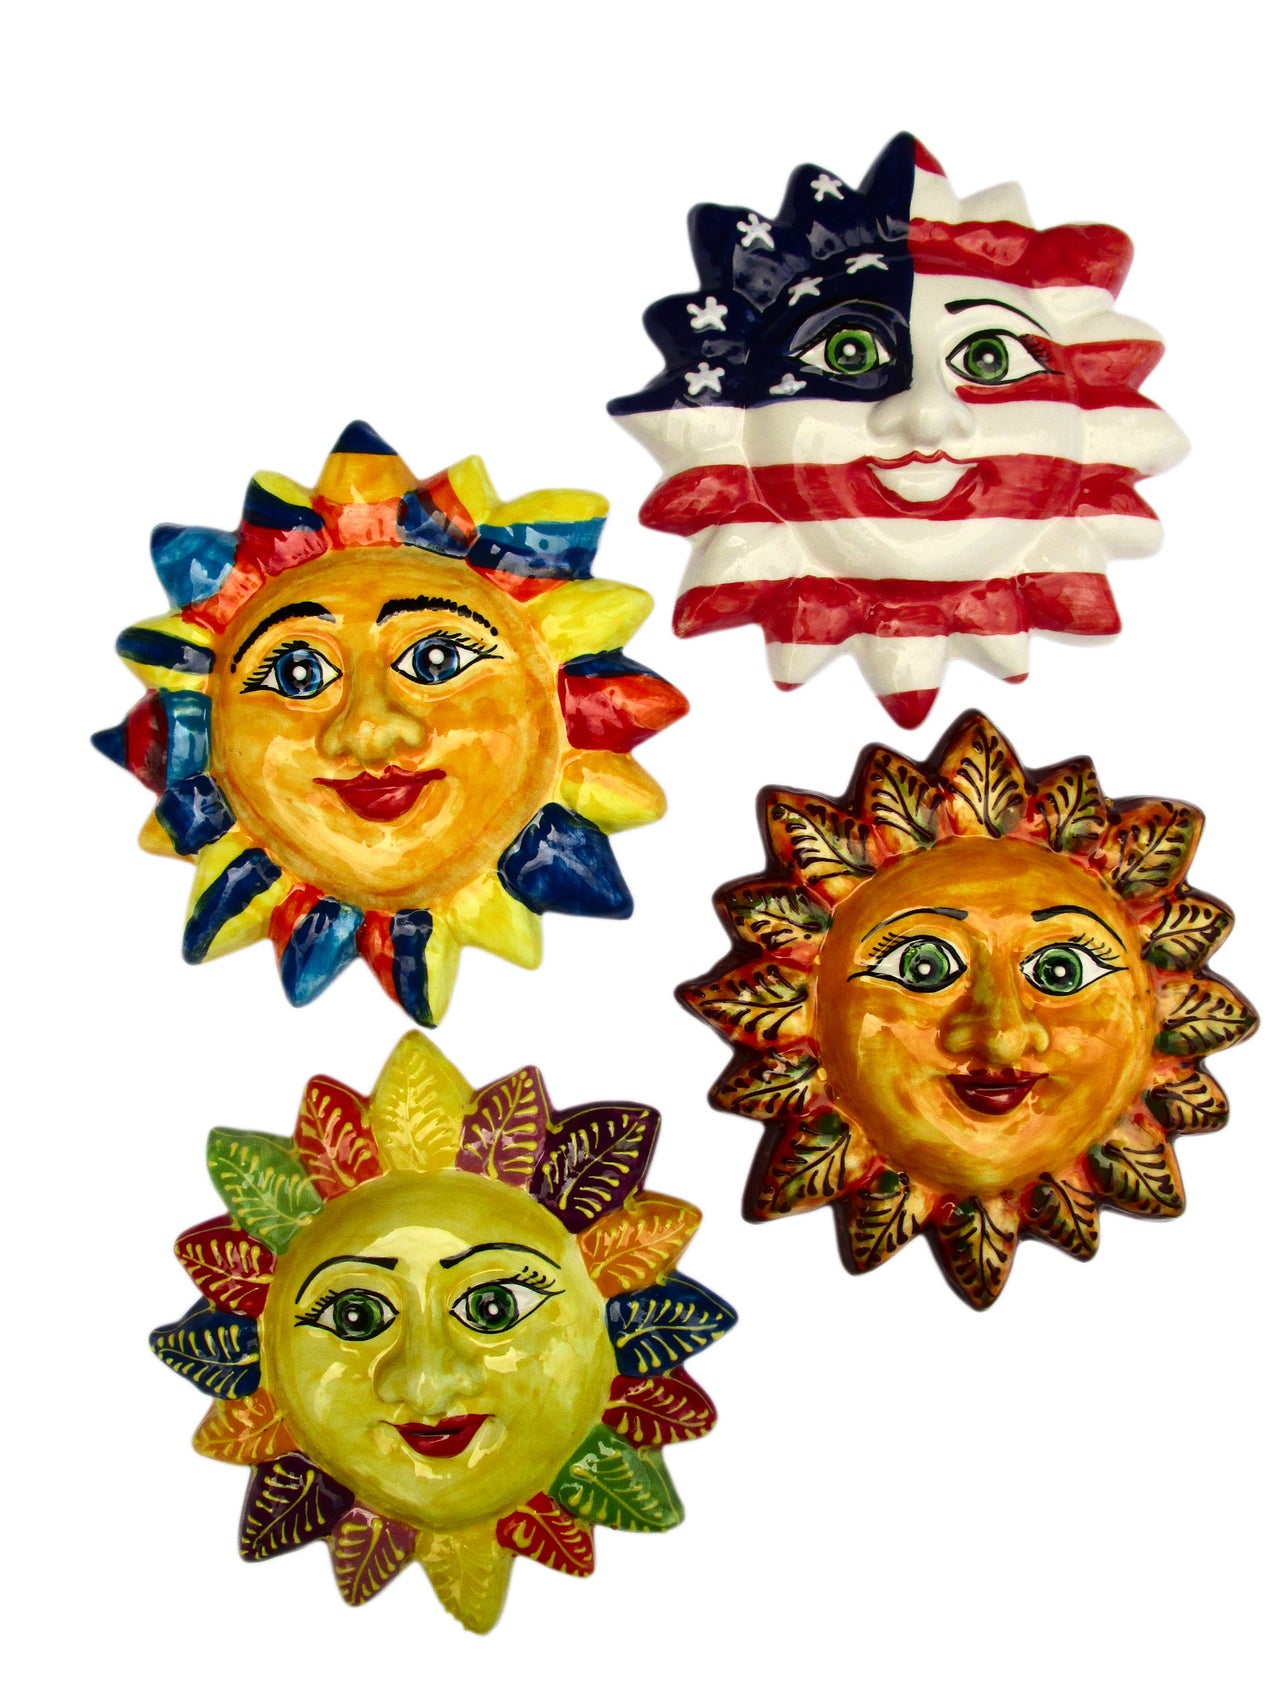 Mr. 4th of July Sun! - Ceramic Sun Hand Painted In Spain